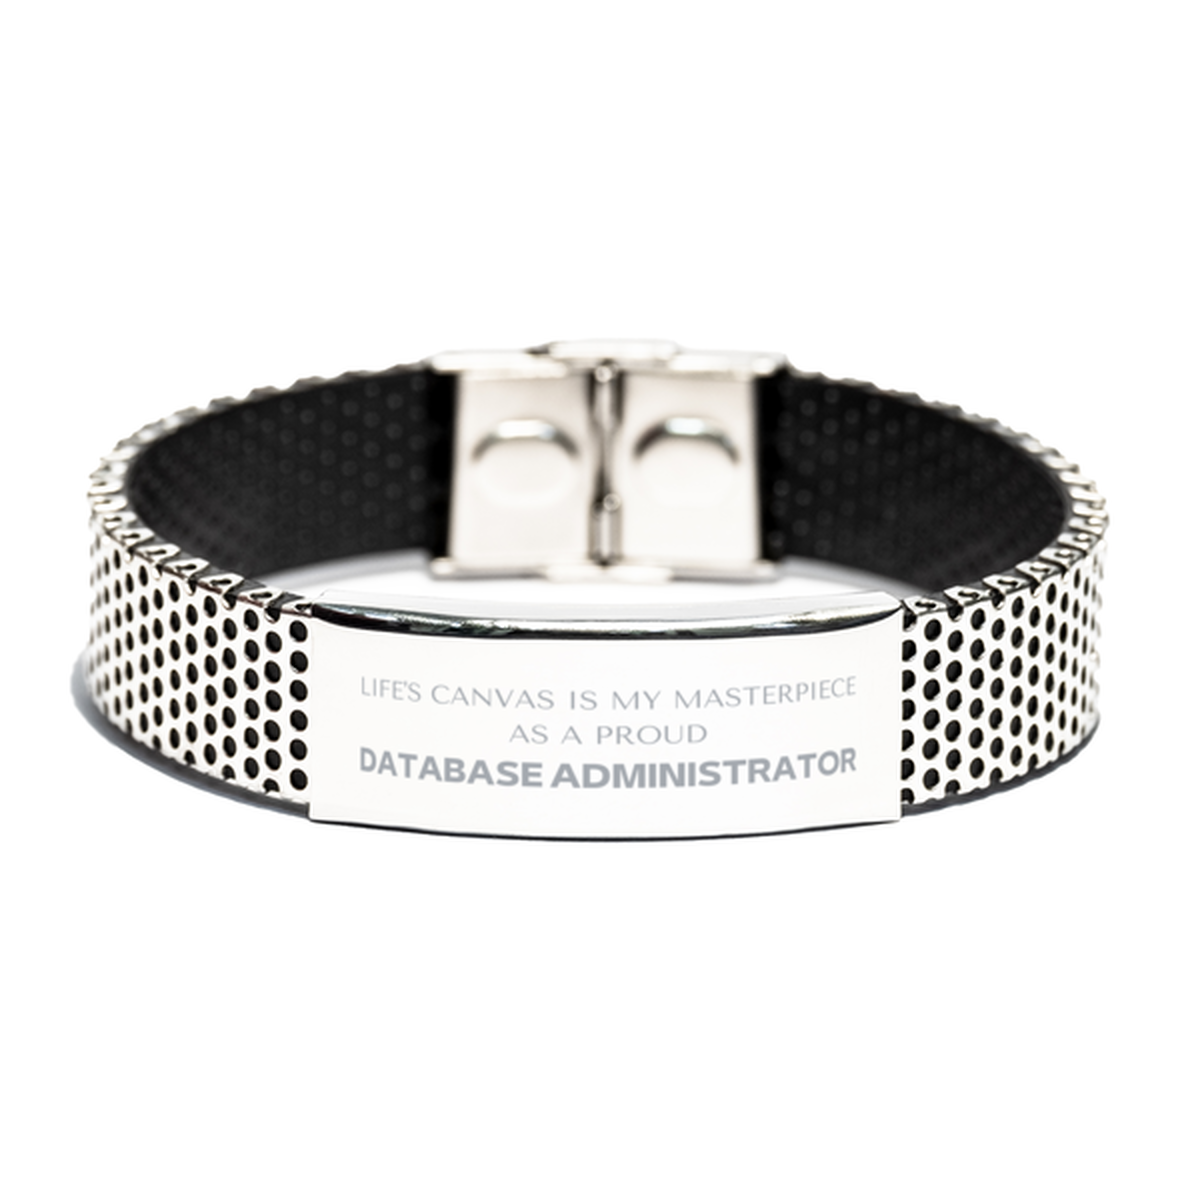 Proud Database Administrator Gifts, Life's canvas is my masterpiece, Epic Birthday Christmas Unique Stainless Steel Bracelet For Database Administrator, Coworkers, Men, Women, Friends